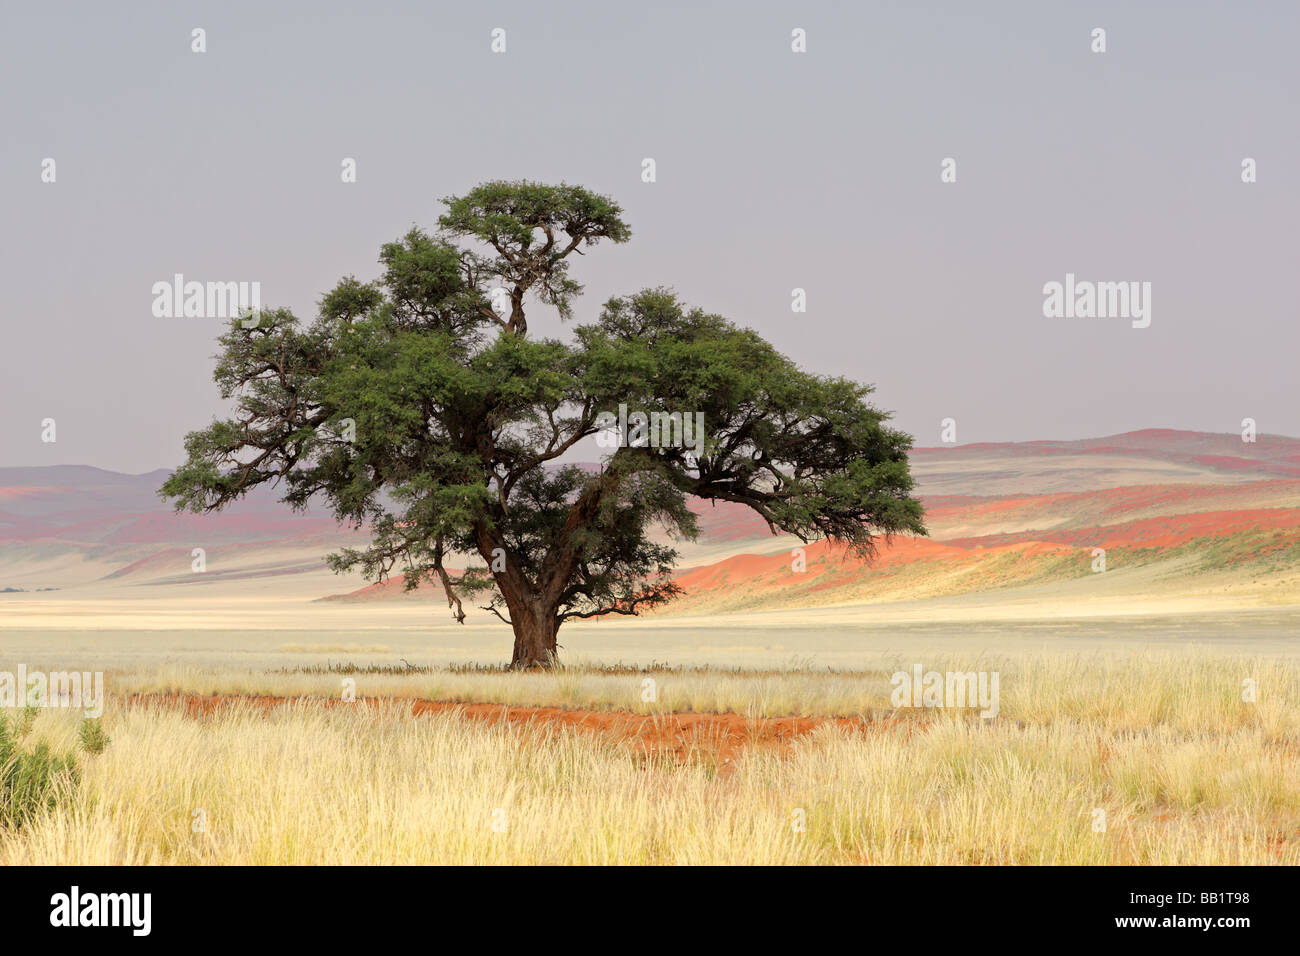 Landscape with an African Acacia tree (Acacia erioloba), Sossusvlei, Namibia, southern Africa Stock Photo